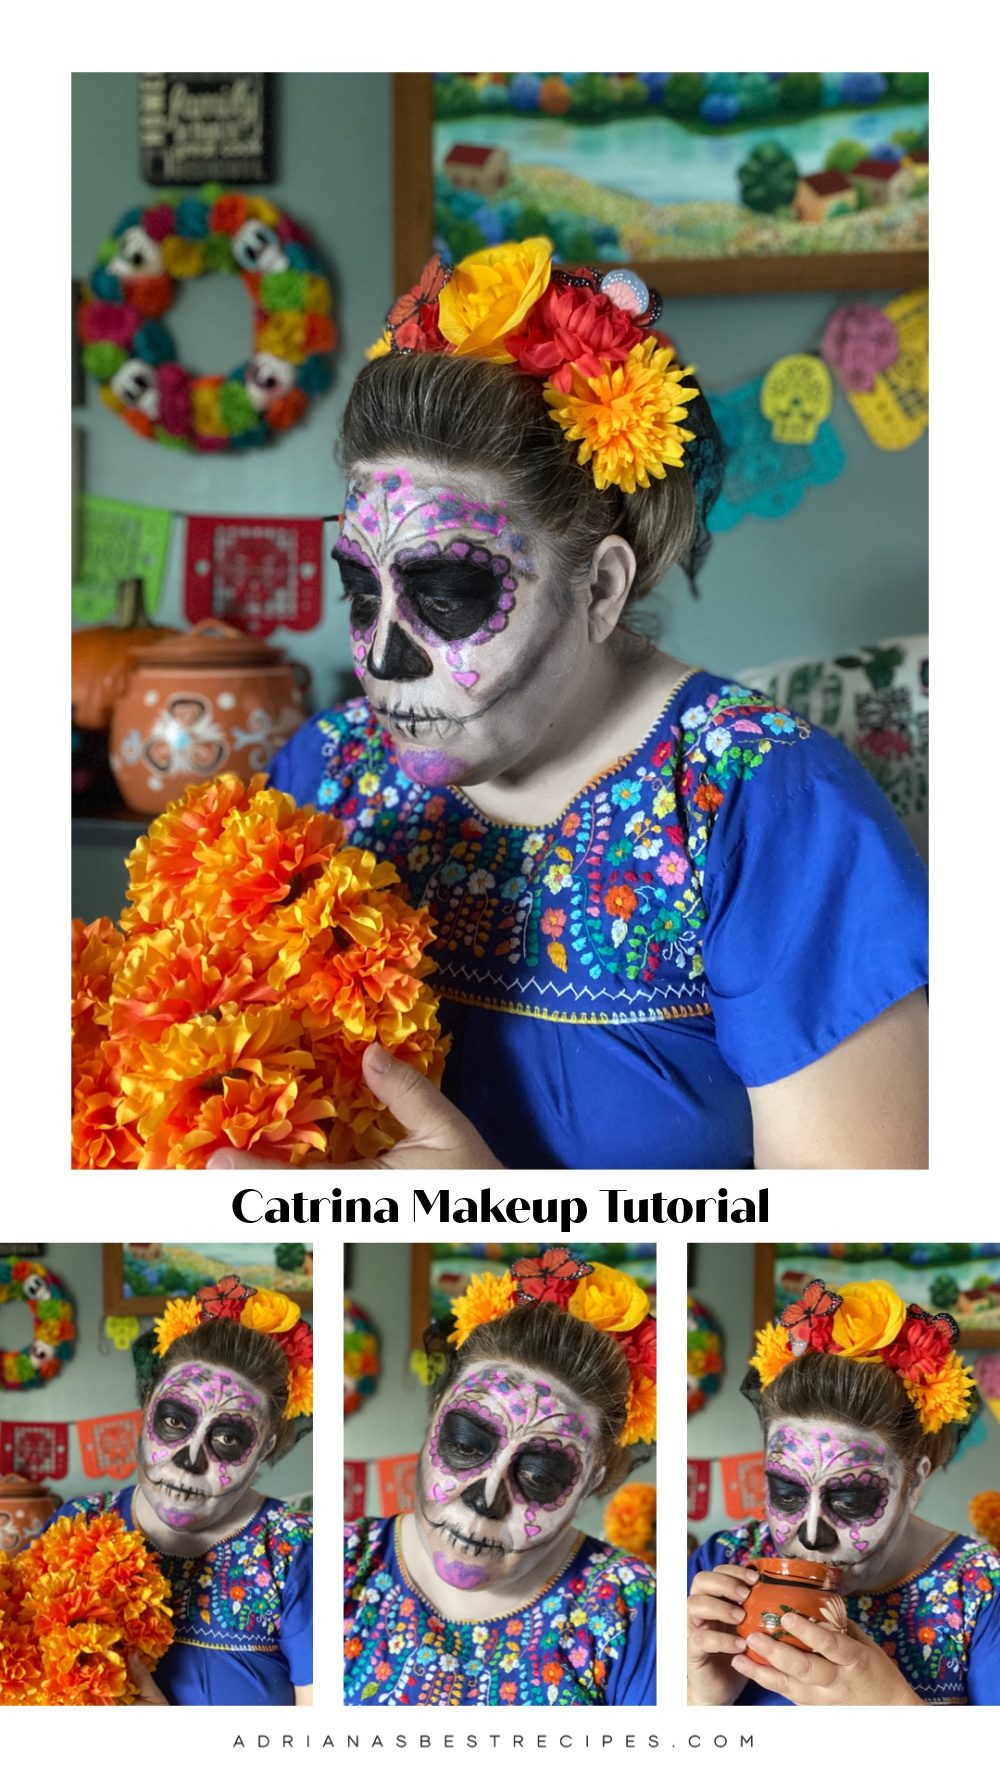 A collage of images showing a woman with La Catrina makeup